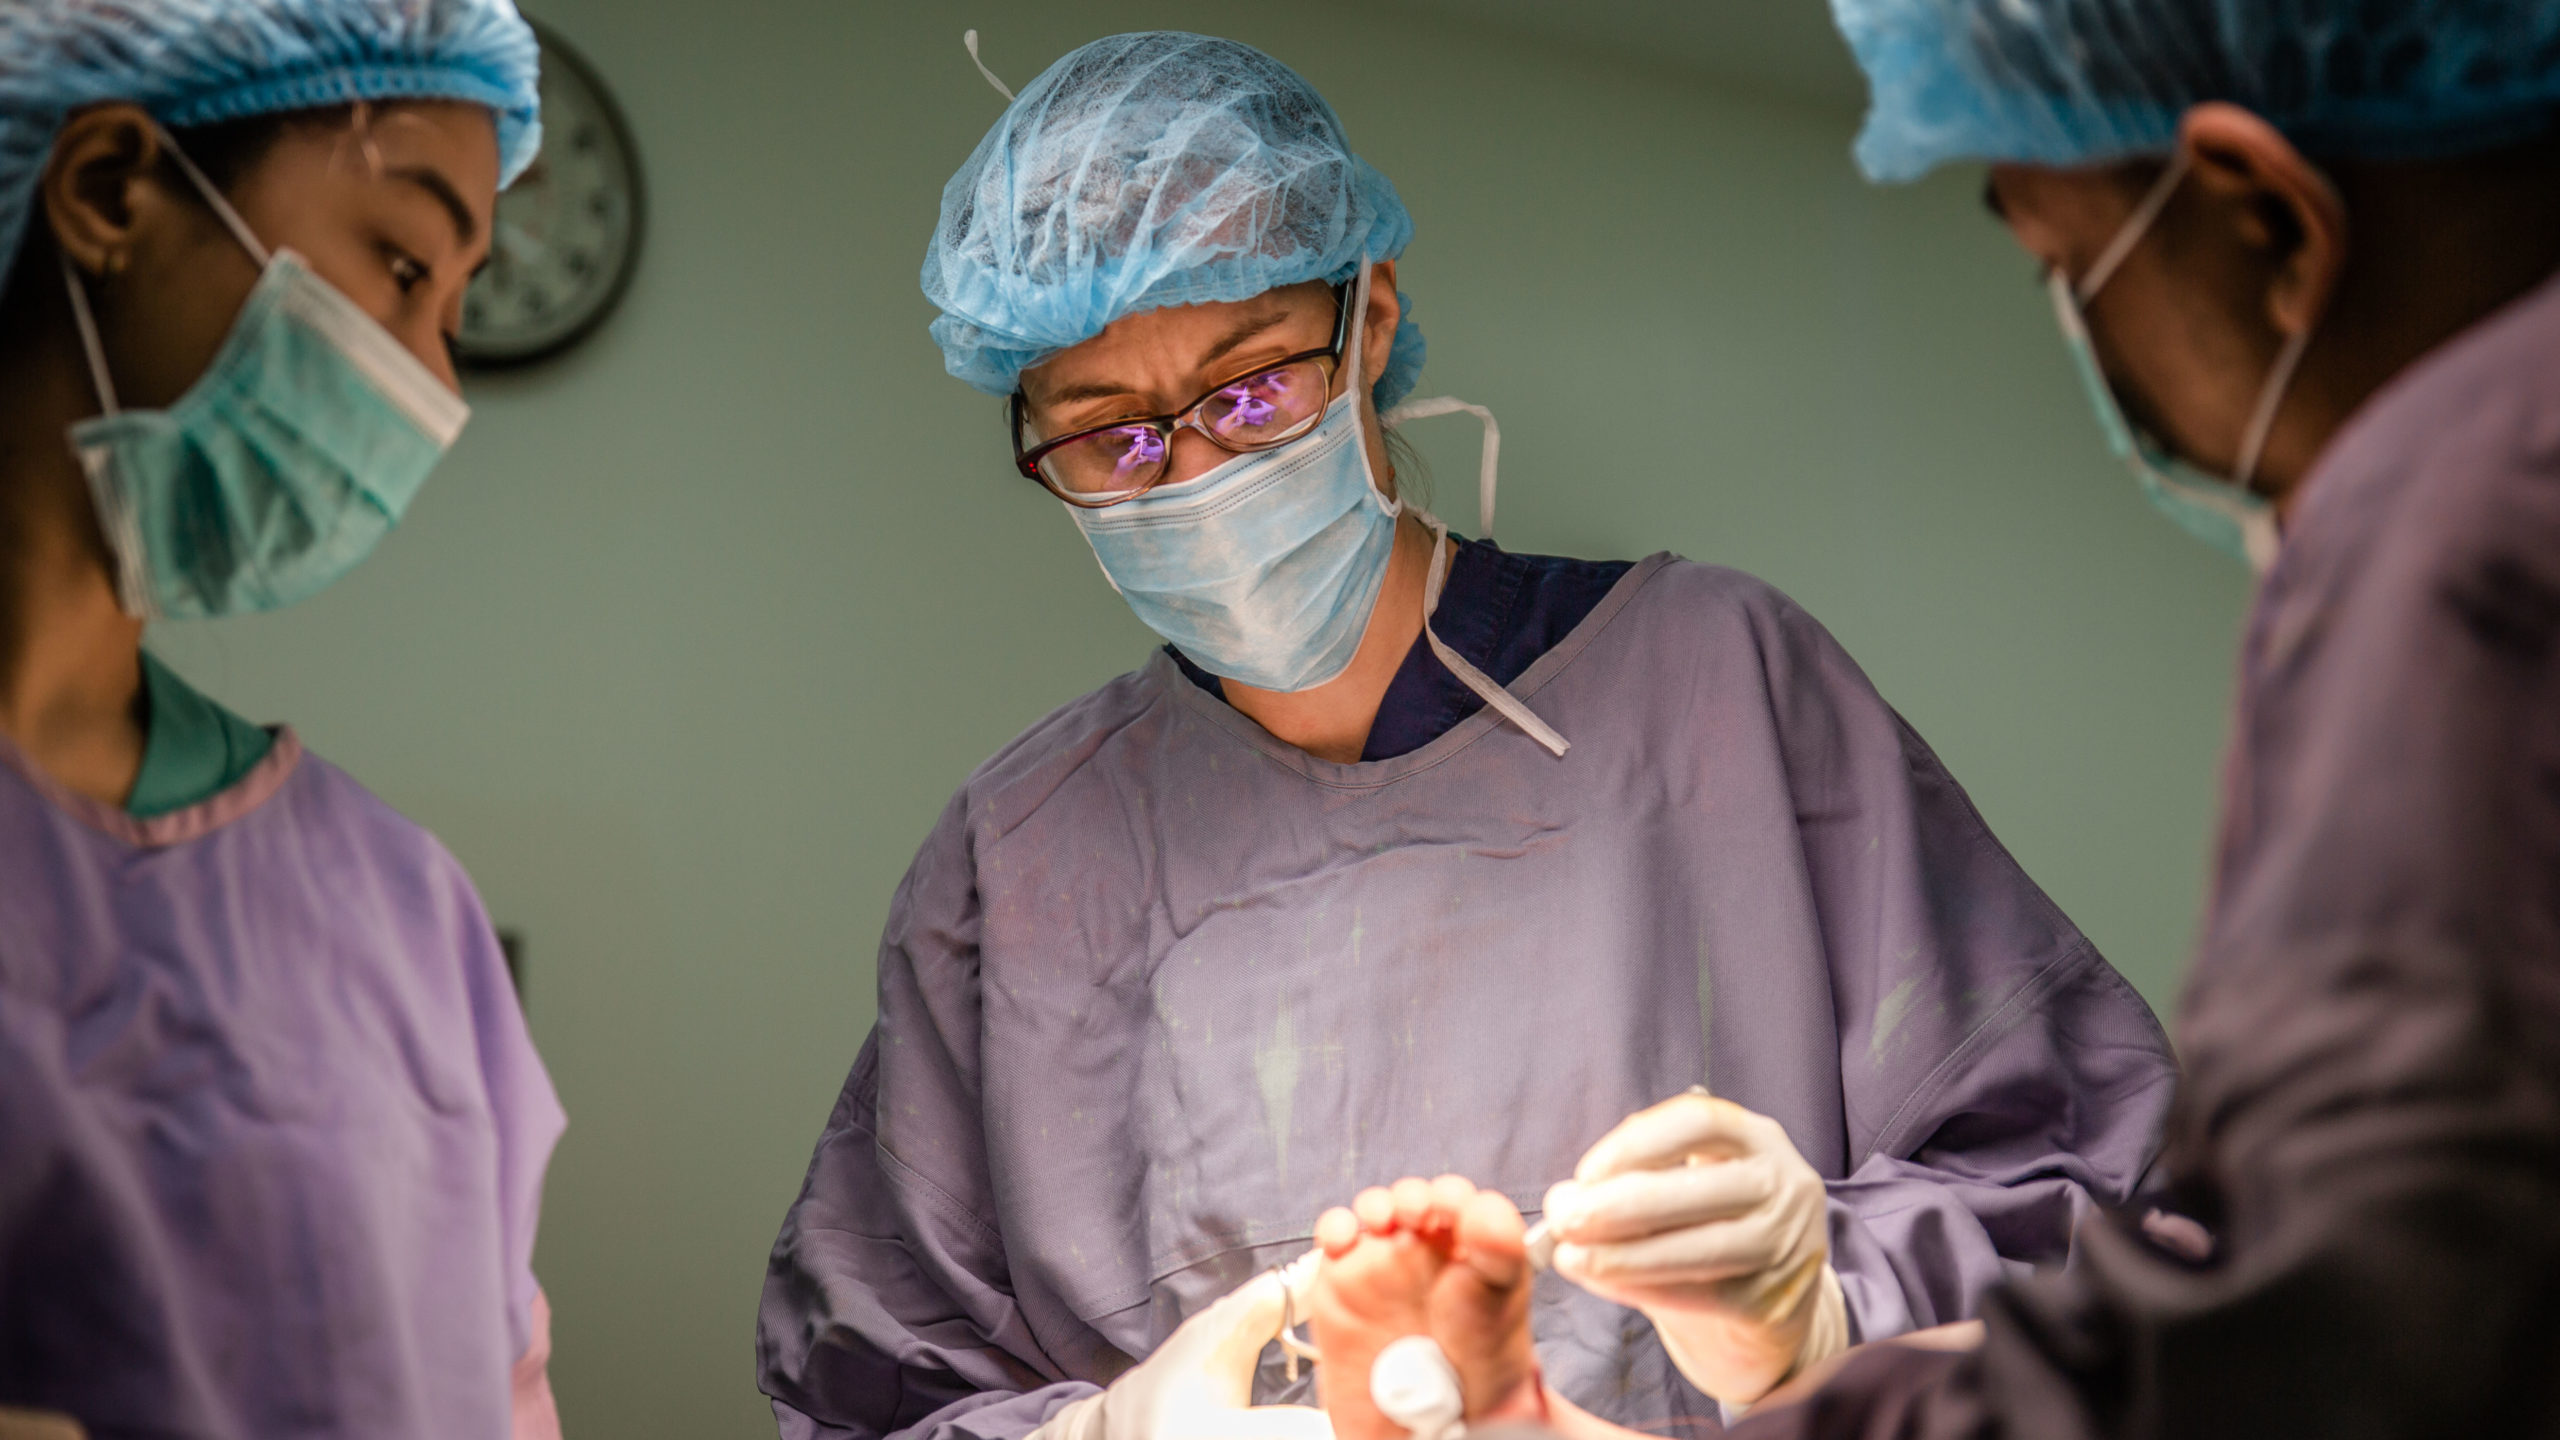 Surgery: An Essential Component in Universal Health Coverage